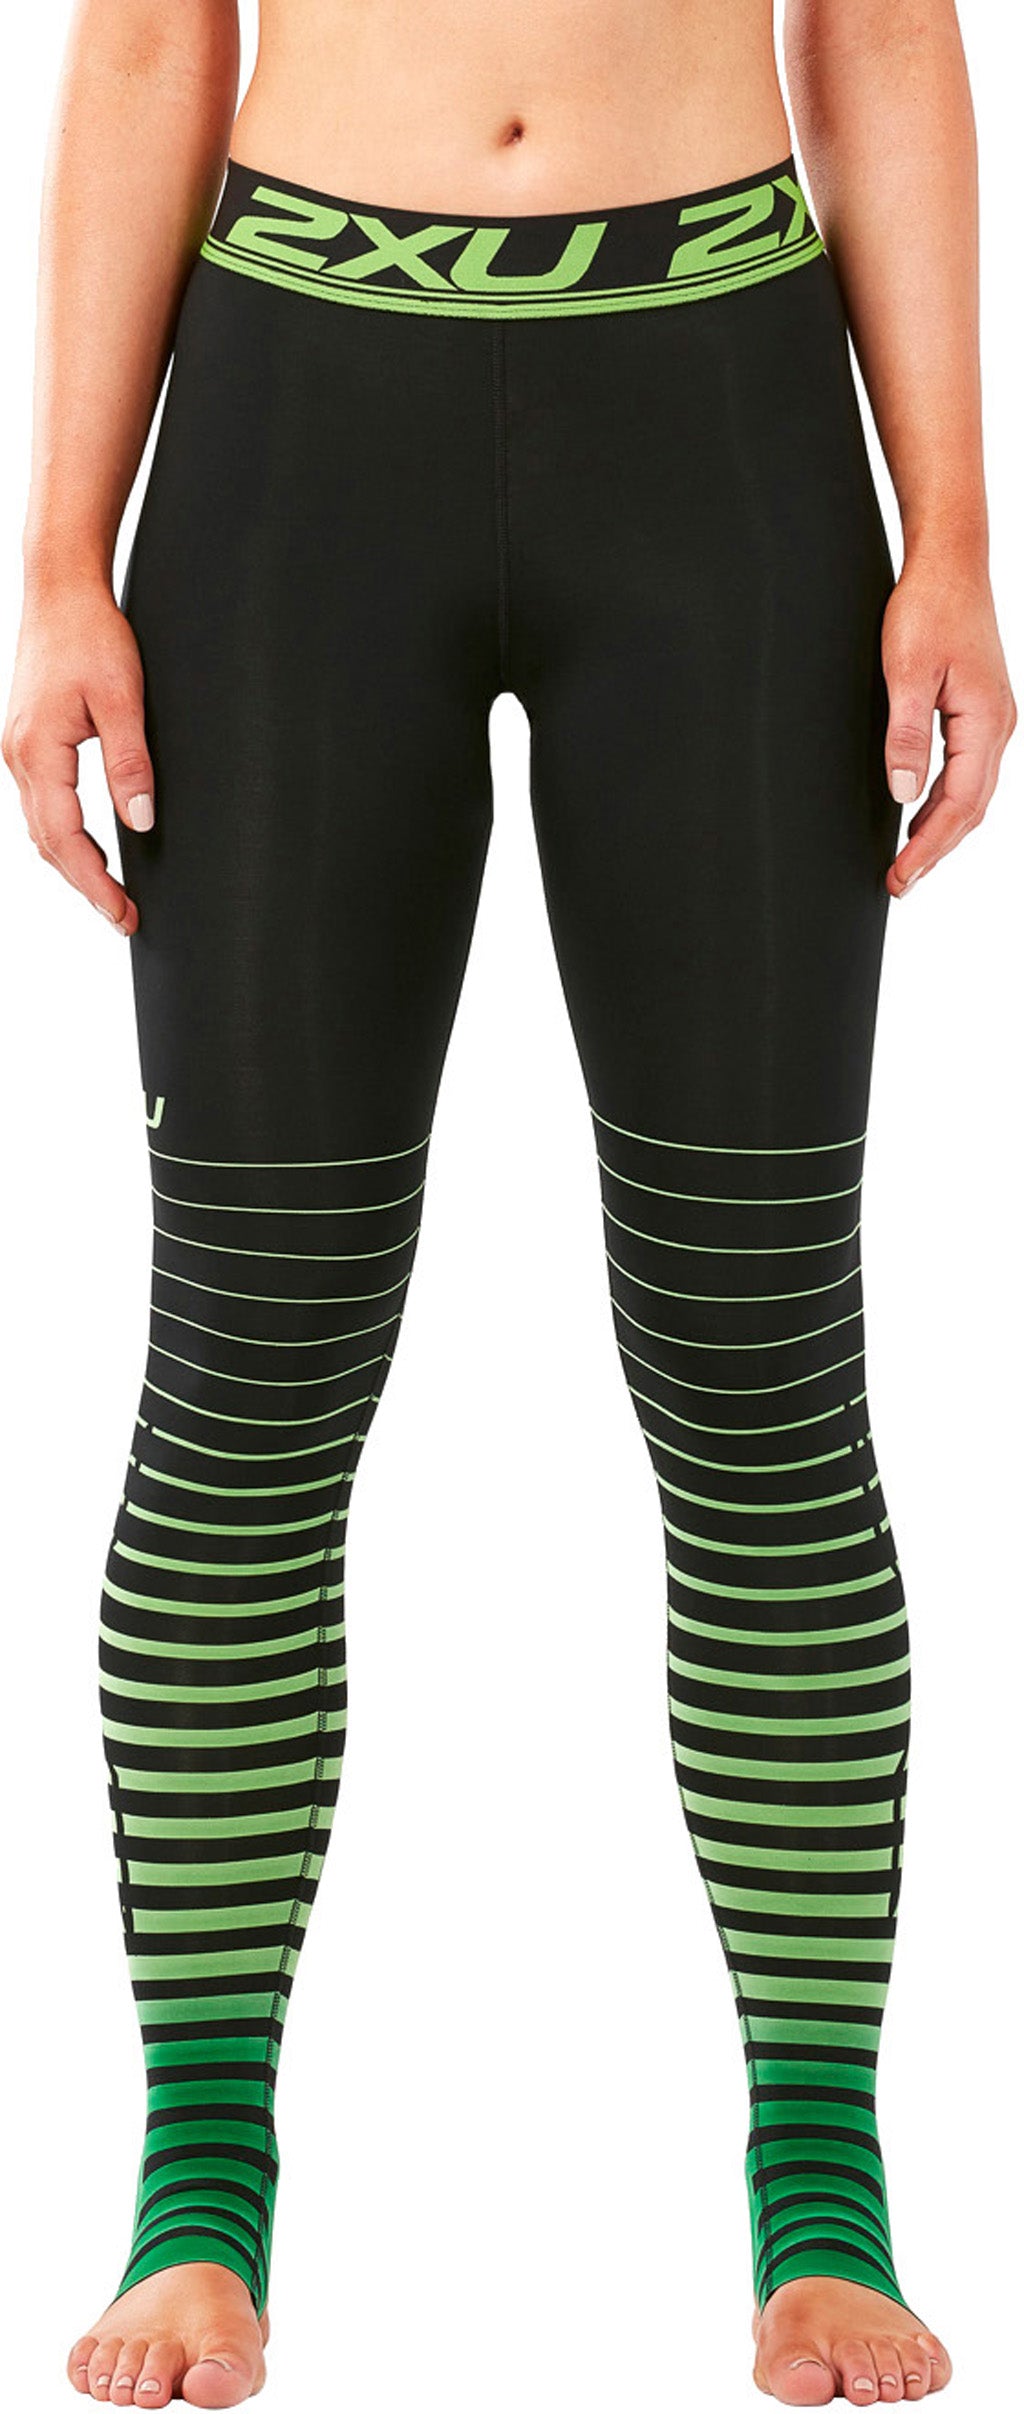 2XU Power Recovery Compression Tights - Large, Black/Green